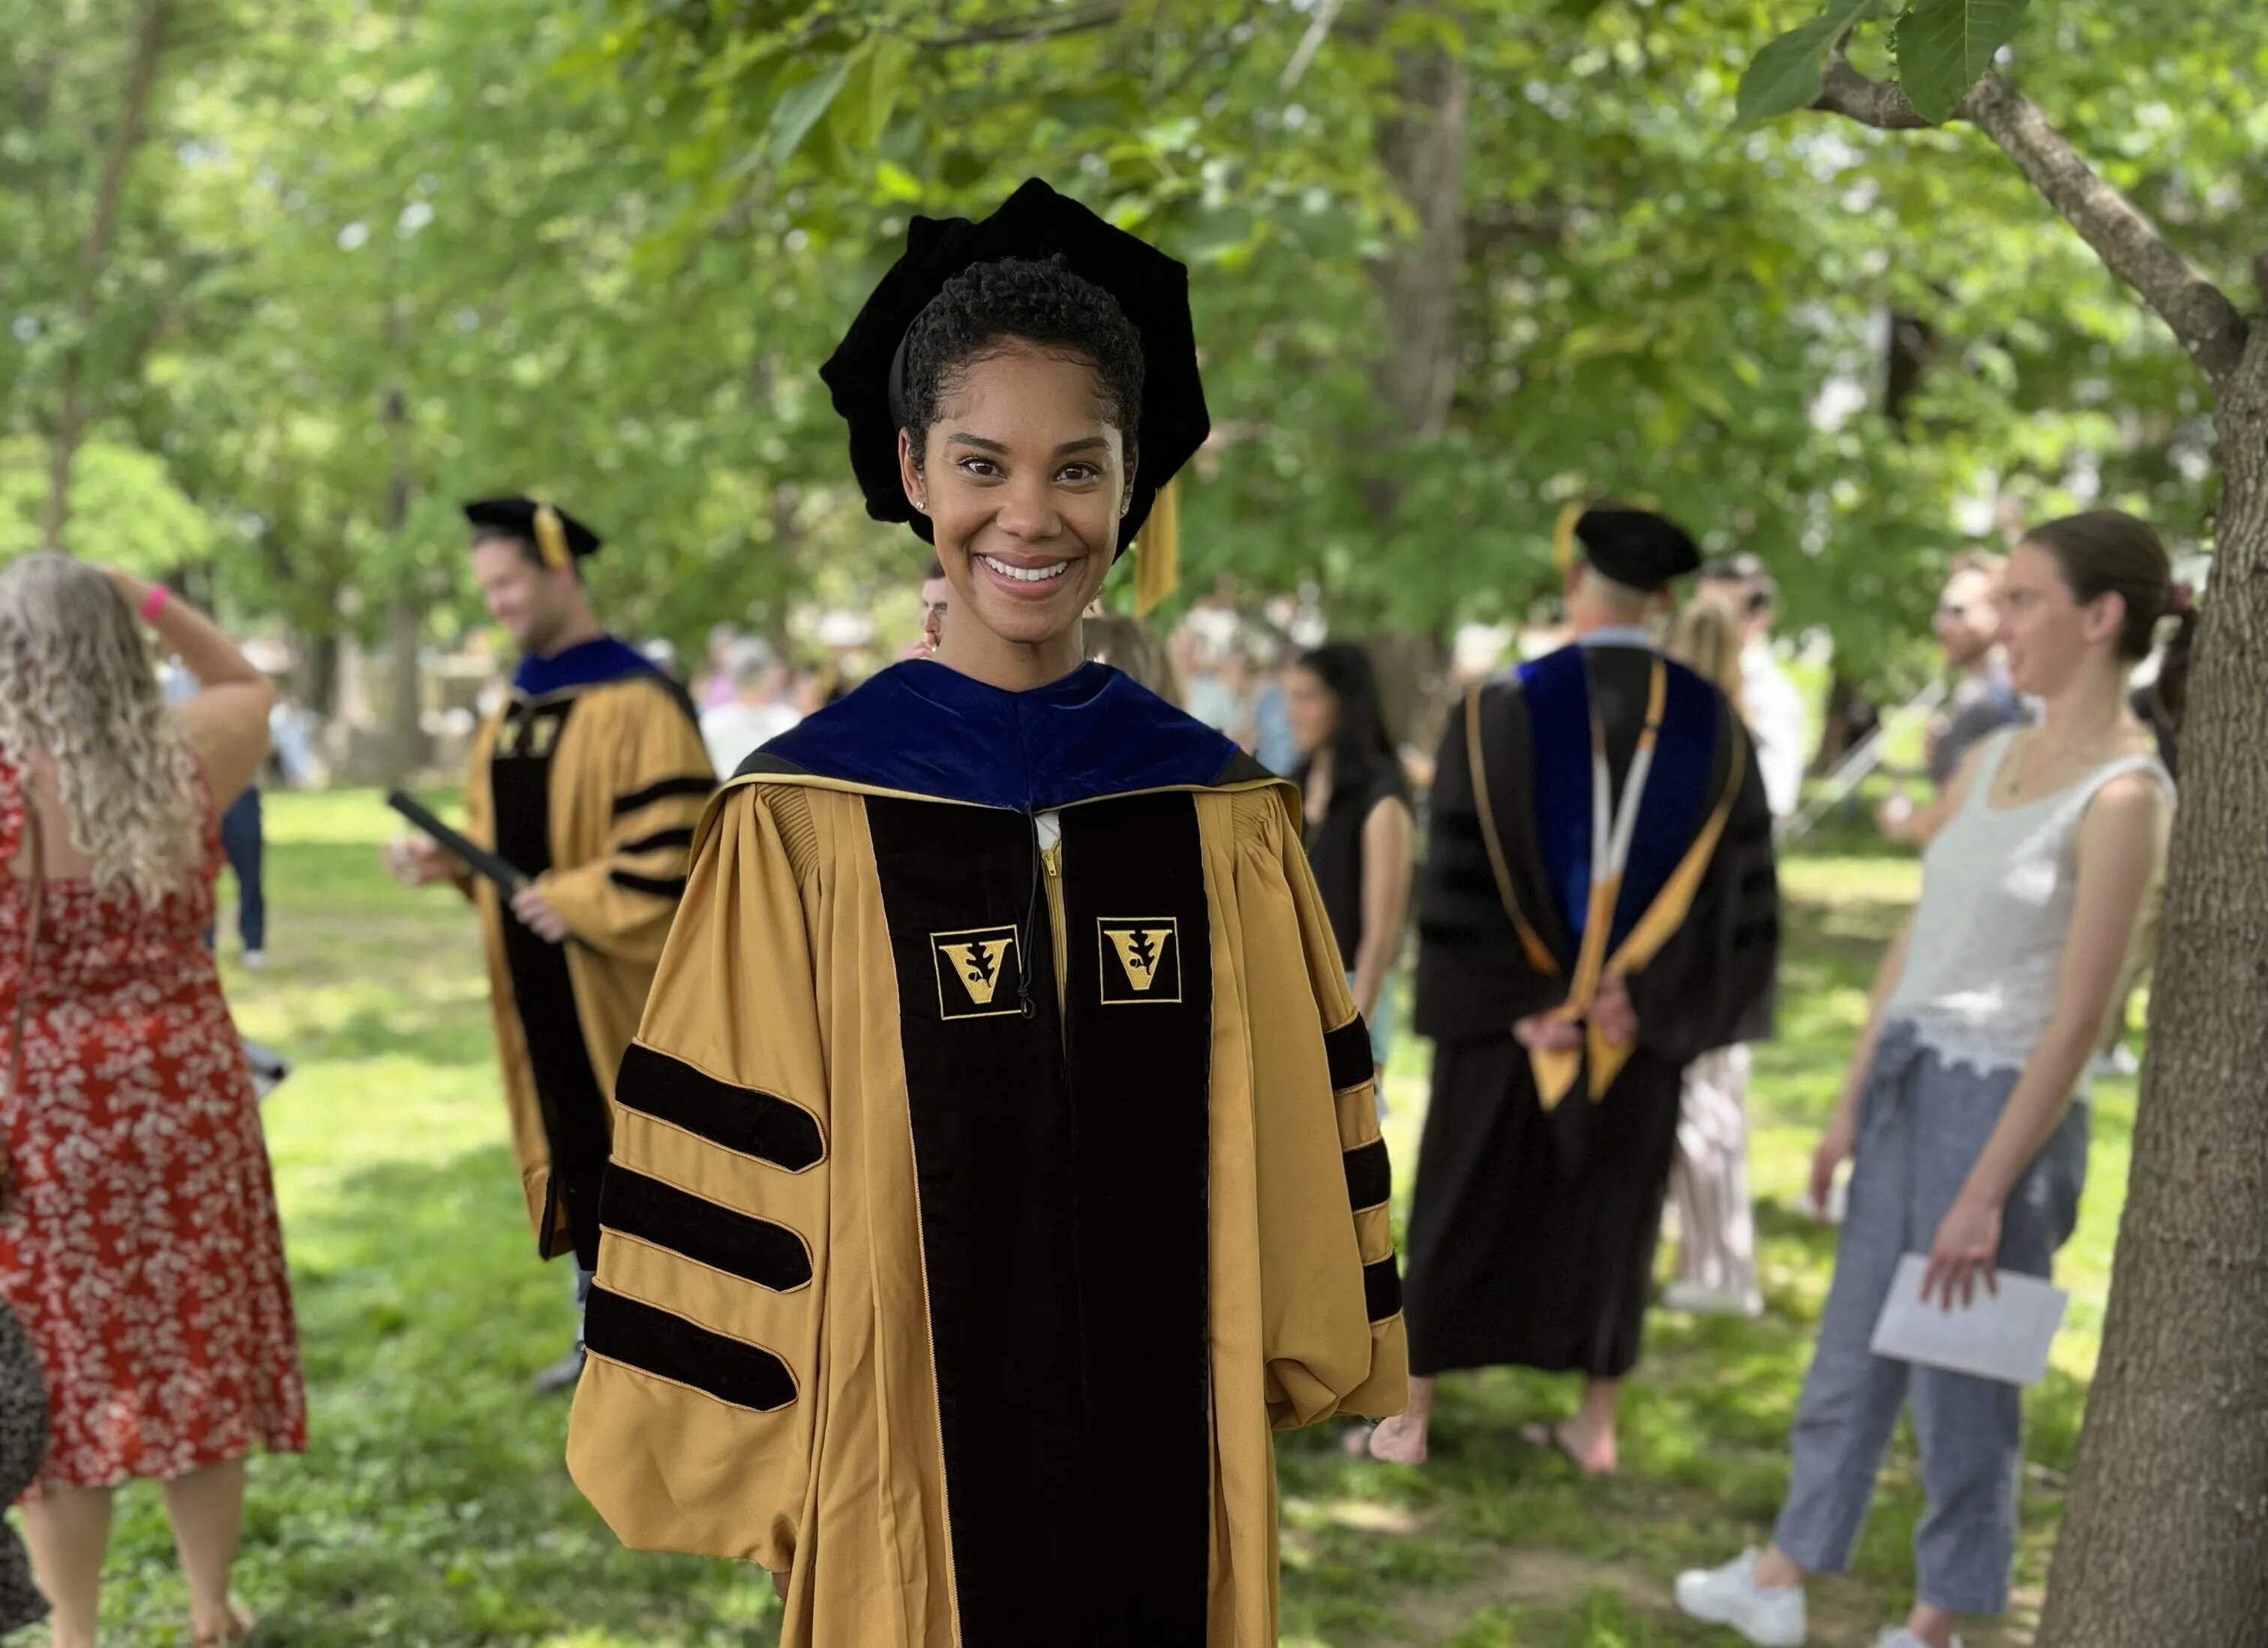 Carcia Carson Becomes First Black Woman To Get A PhD In Biomedical Engineering From Vanderbilt University